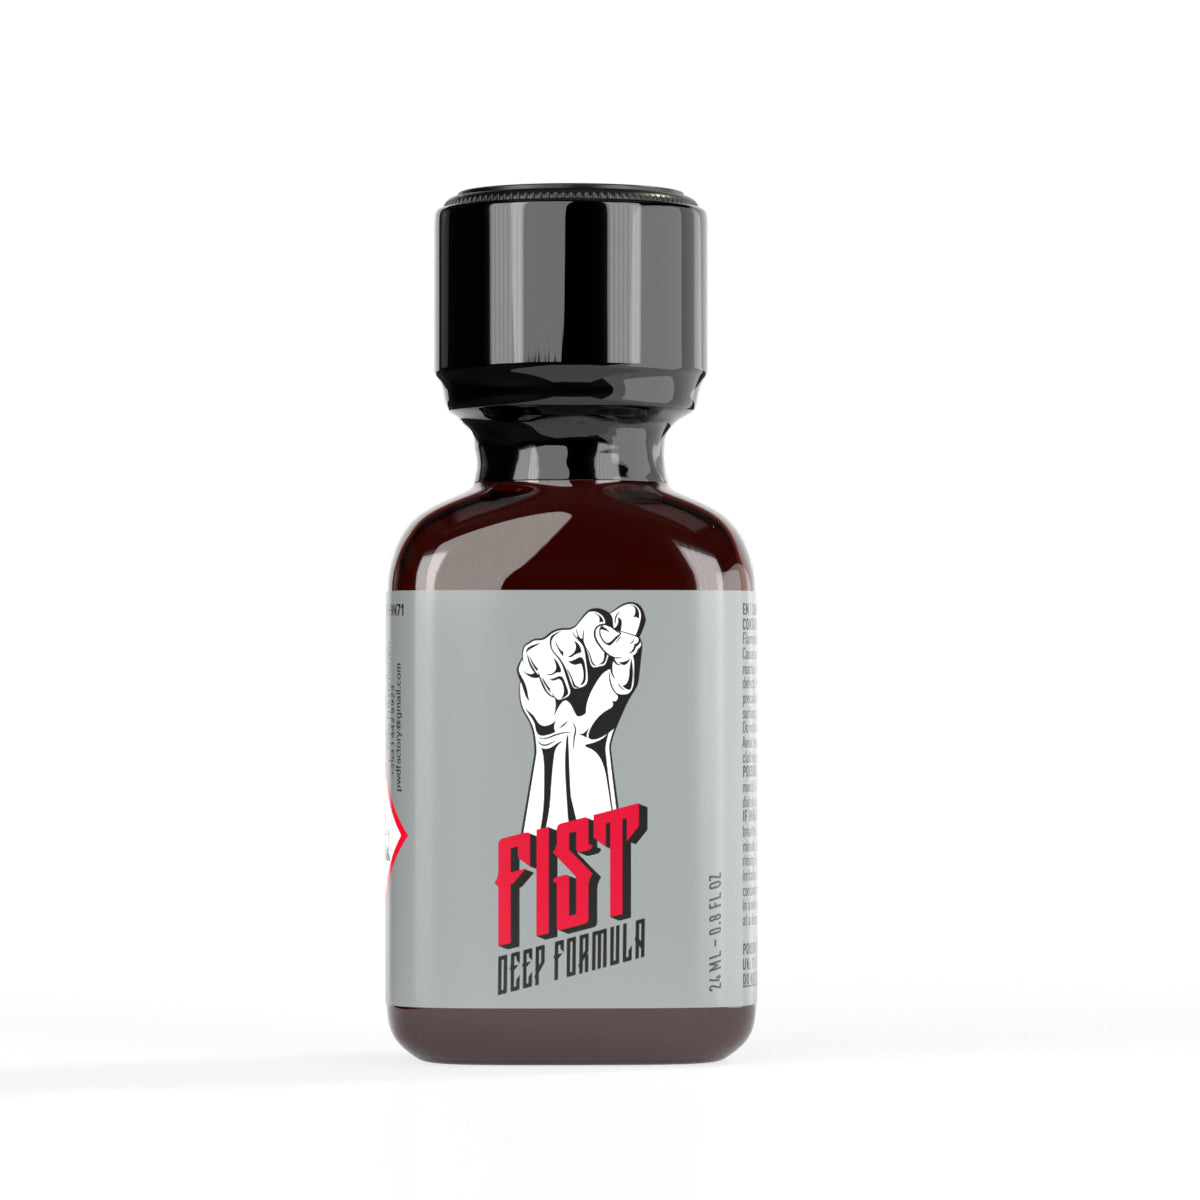 A product photo of a 24ml bottle of Fist Extra Deep.